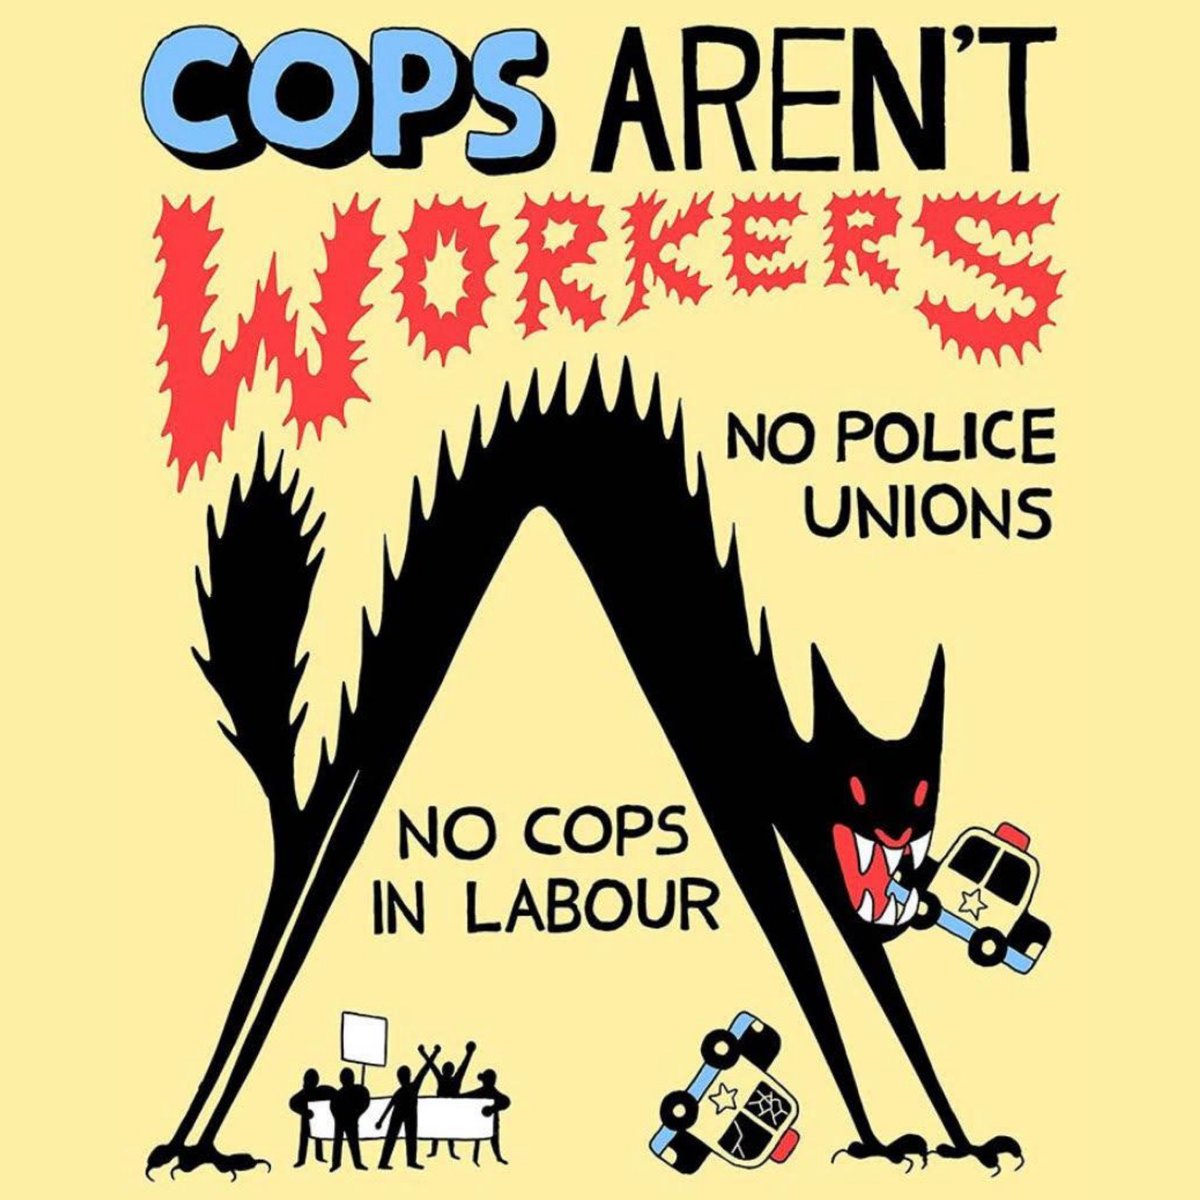 We want to remind people that COPS ARE NOT WORKERS, that our universities have real workers (especially our Black & Brown dinning/dorm workers that need support), and that we should not be interacting with the FOP AT ALL5a/